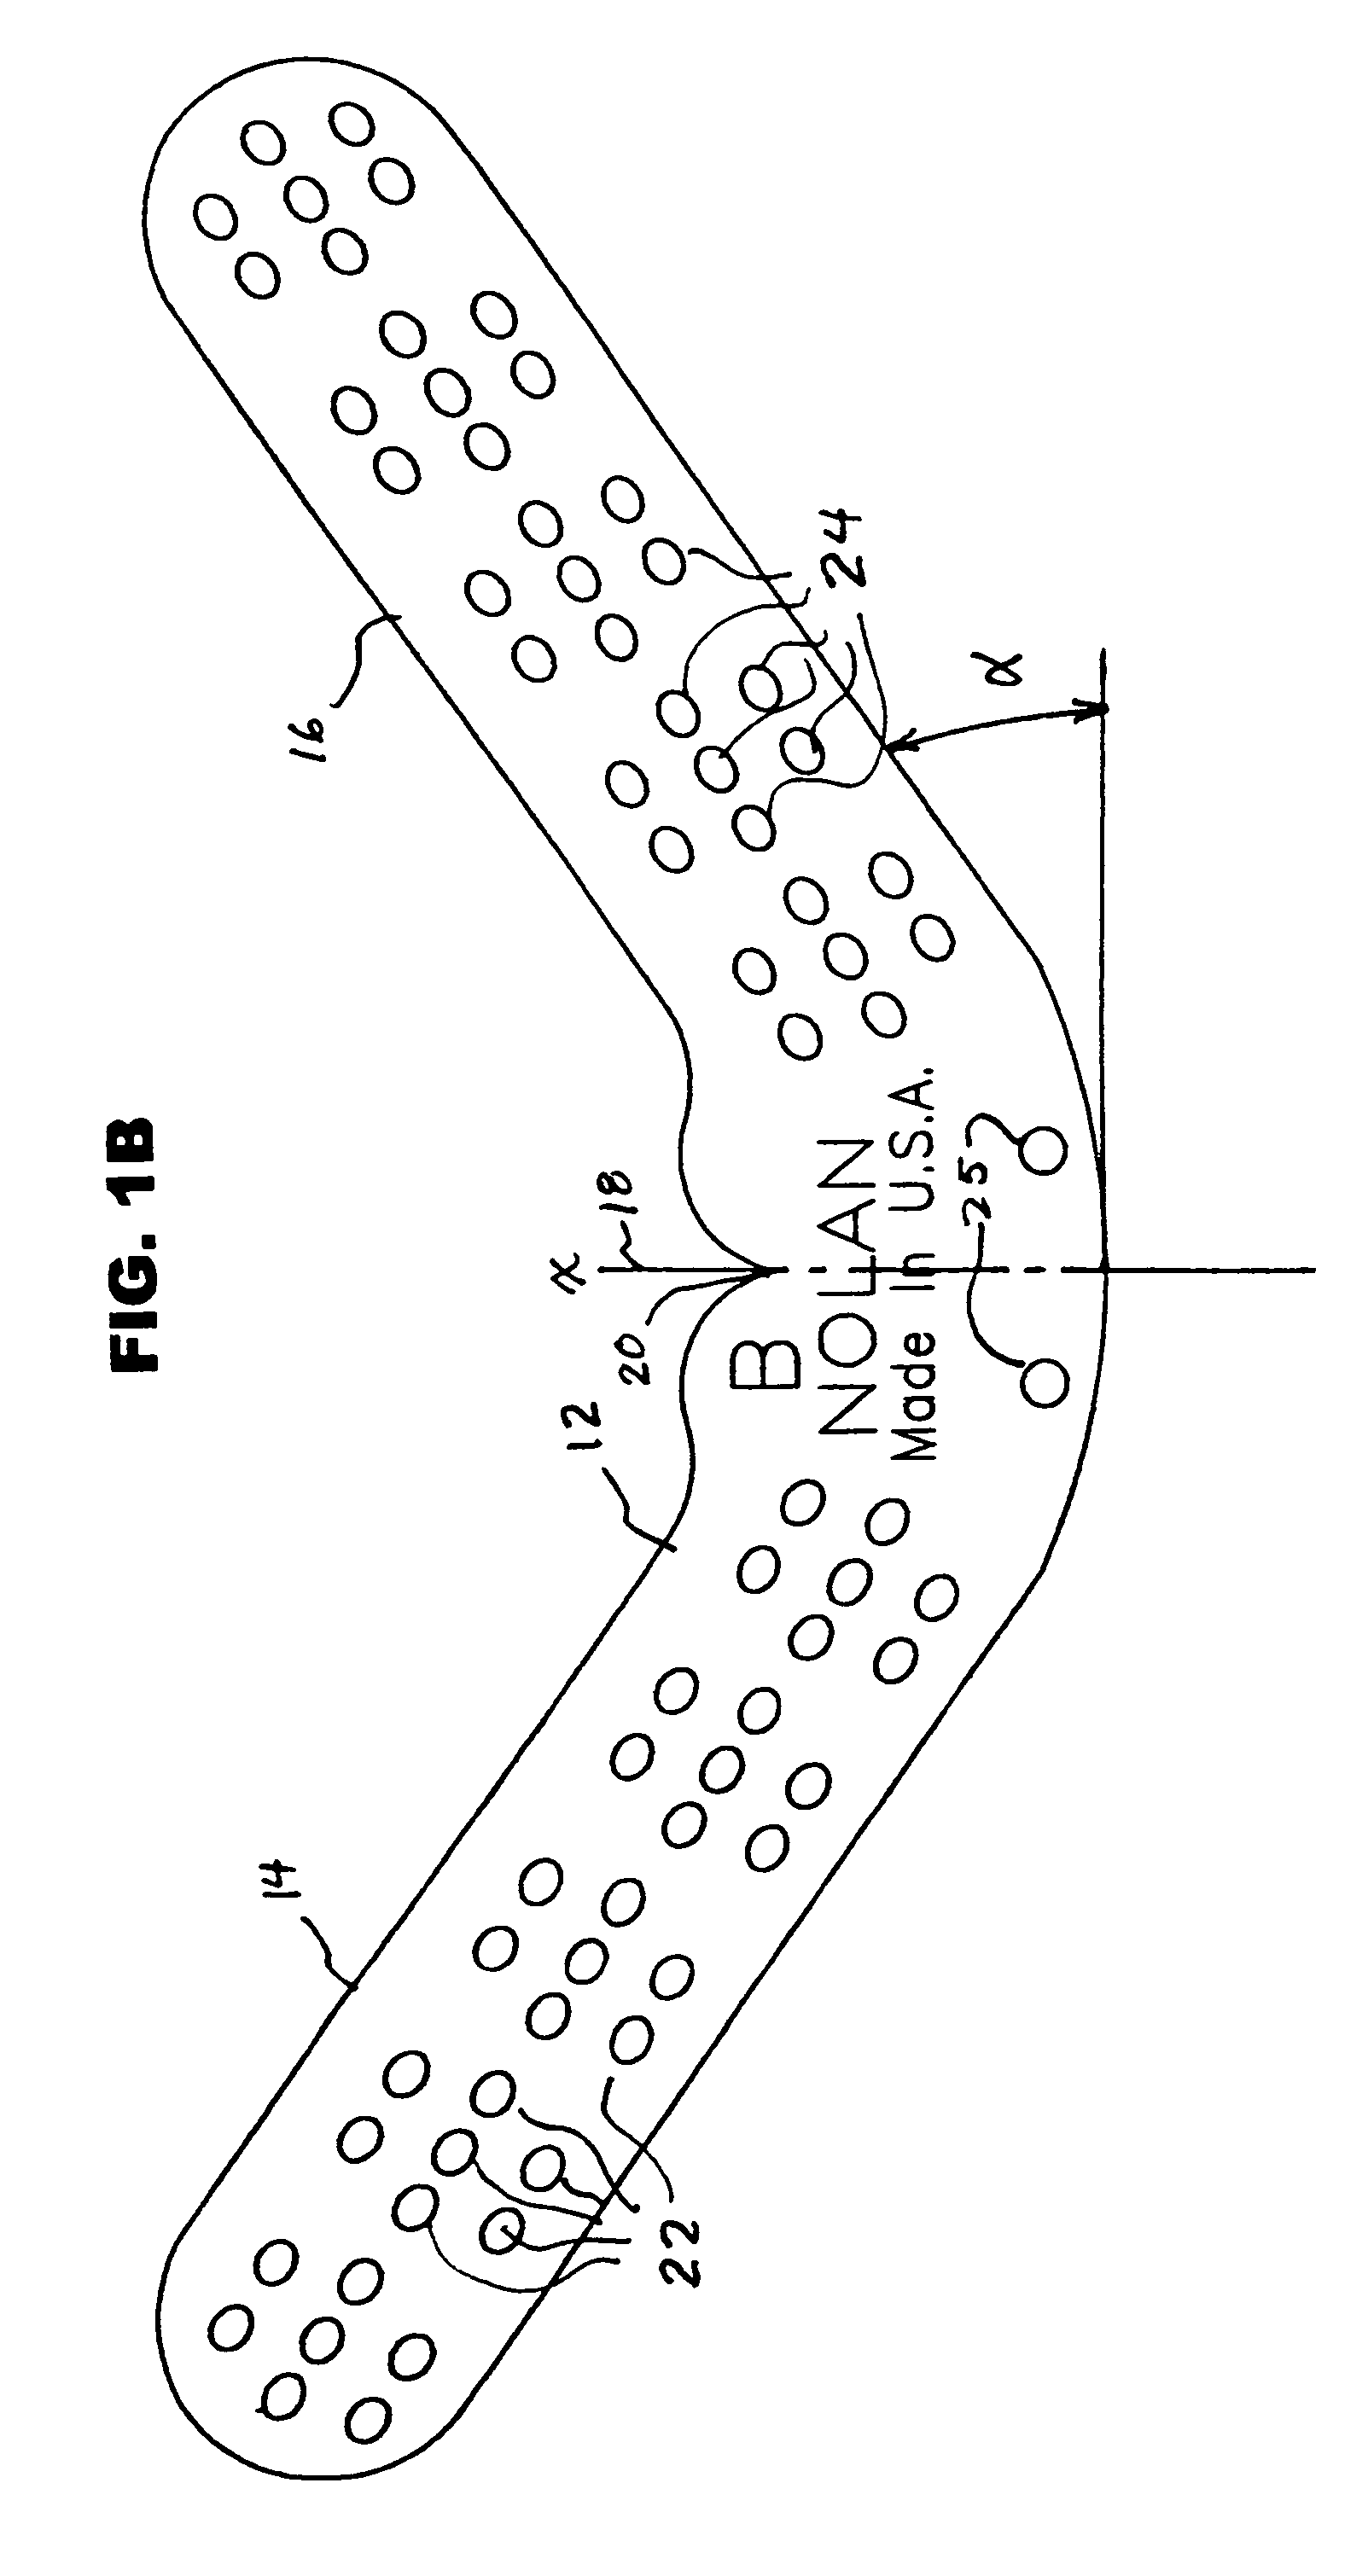 Method and apparatus for treating hoof problems